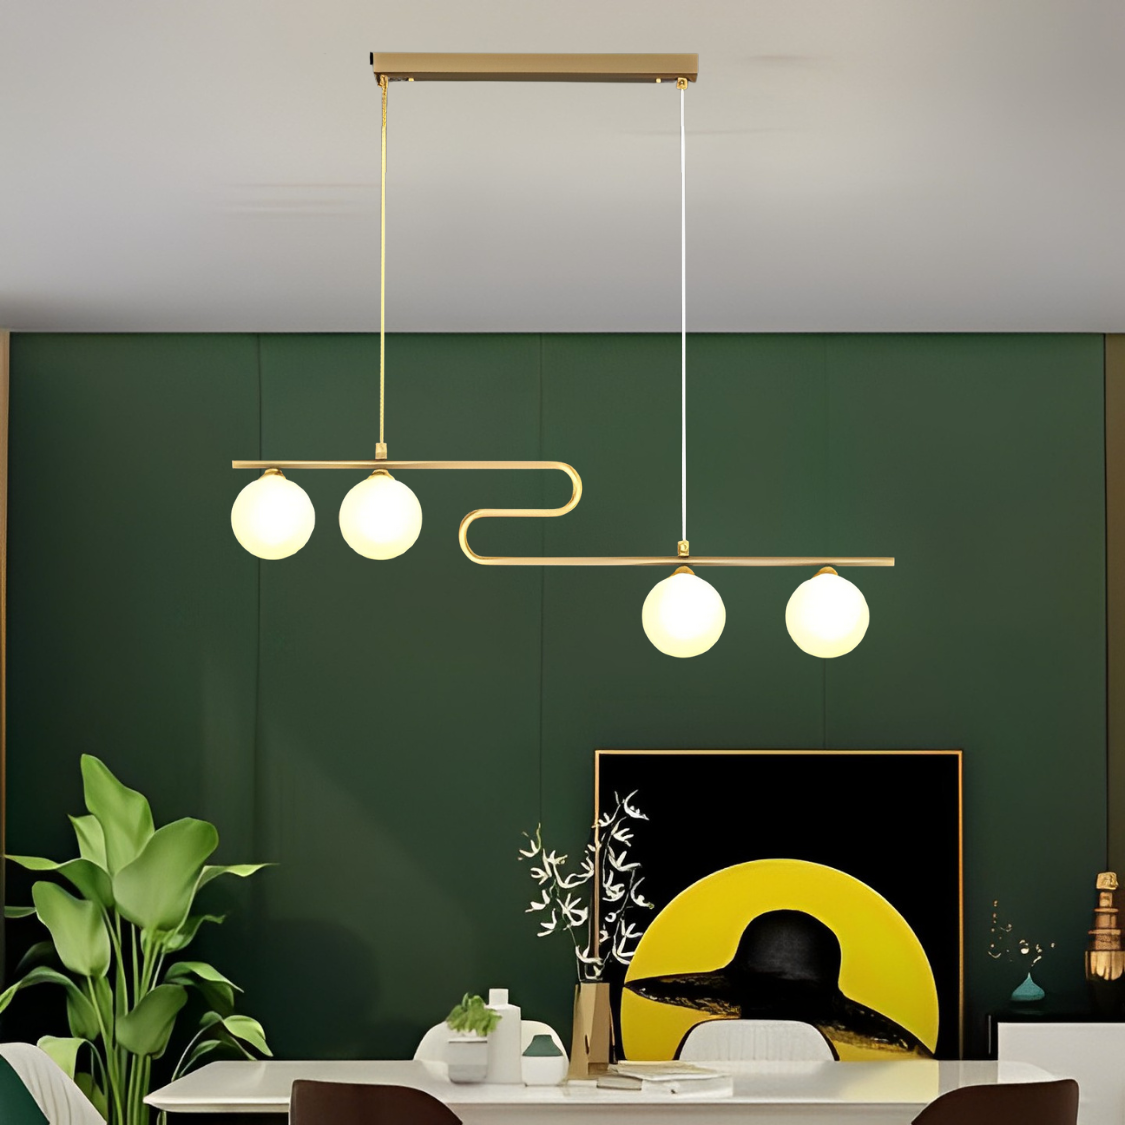 Nordic Golden Chandelier by Gloss (0972/4)